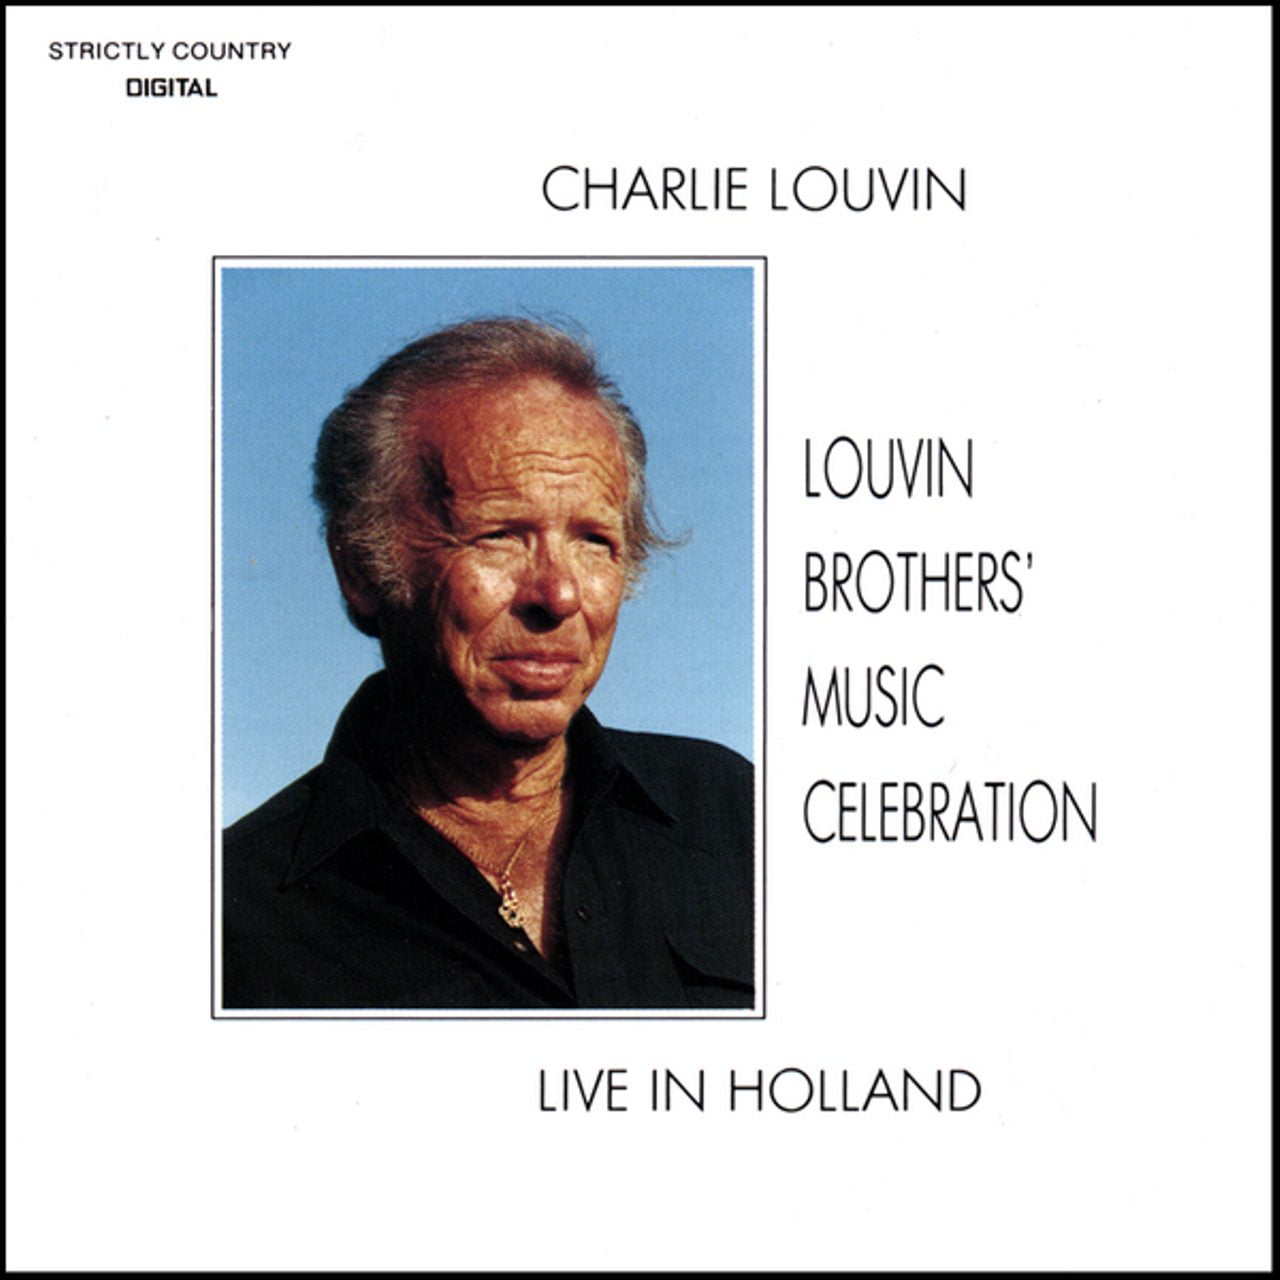 Charlie Louvin - Louvin Brothers' Music Celebration, Live in Holland cover album